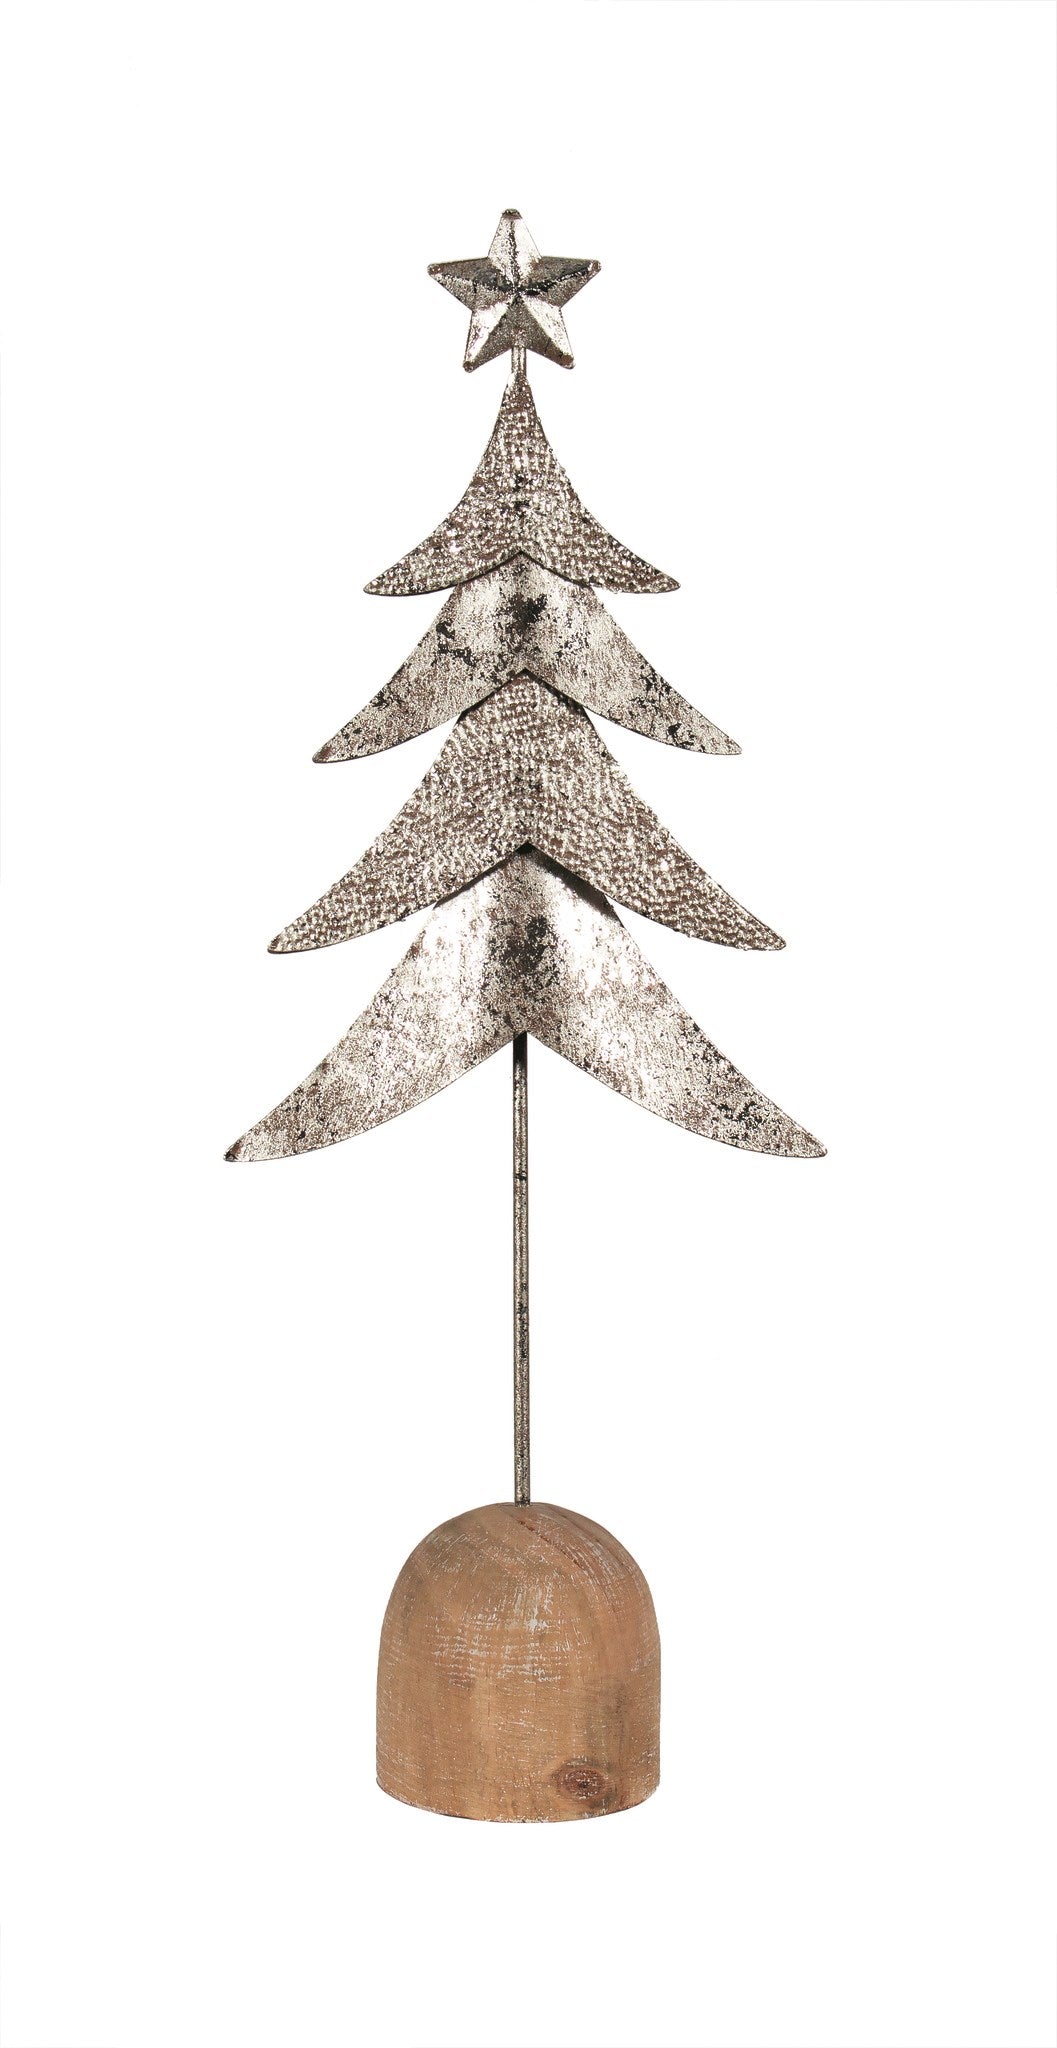 Silver Stamped Metal Tree on Stand (2 Sizes)